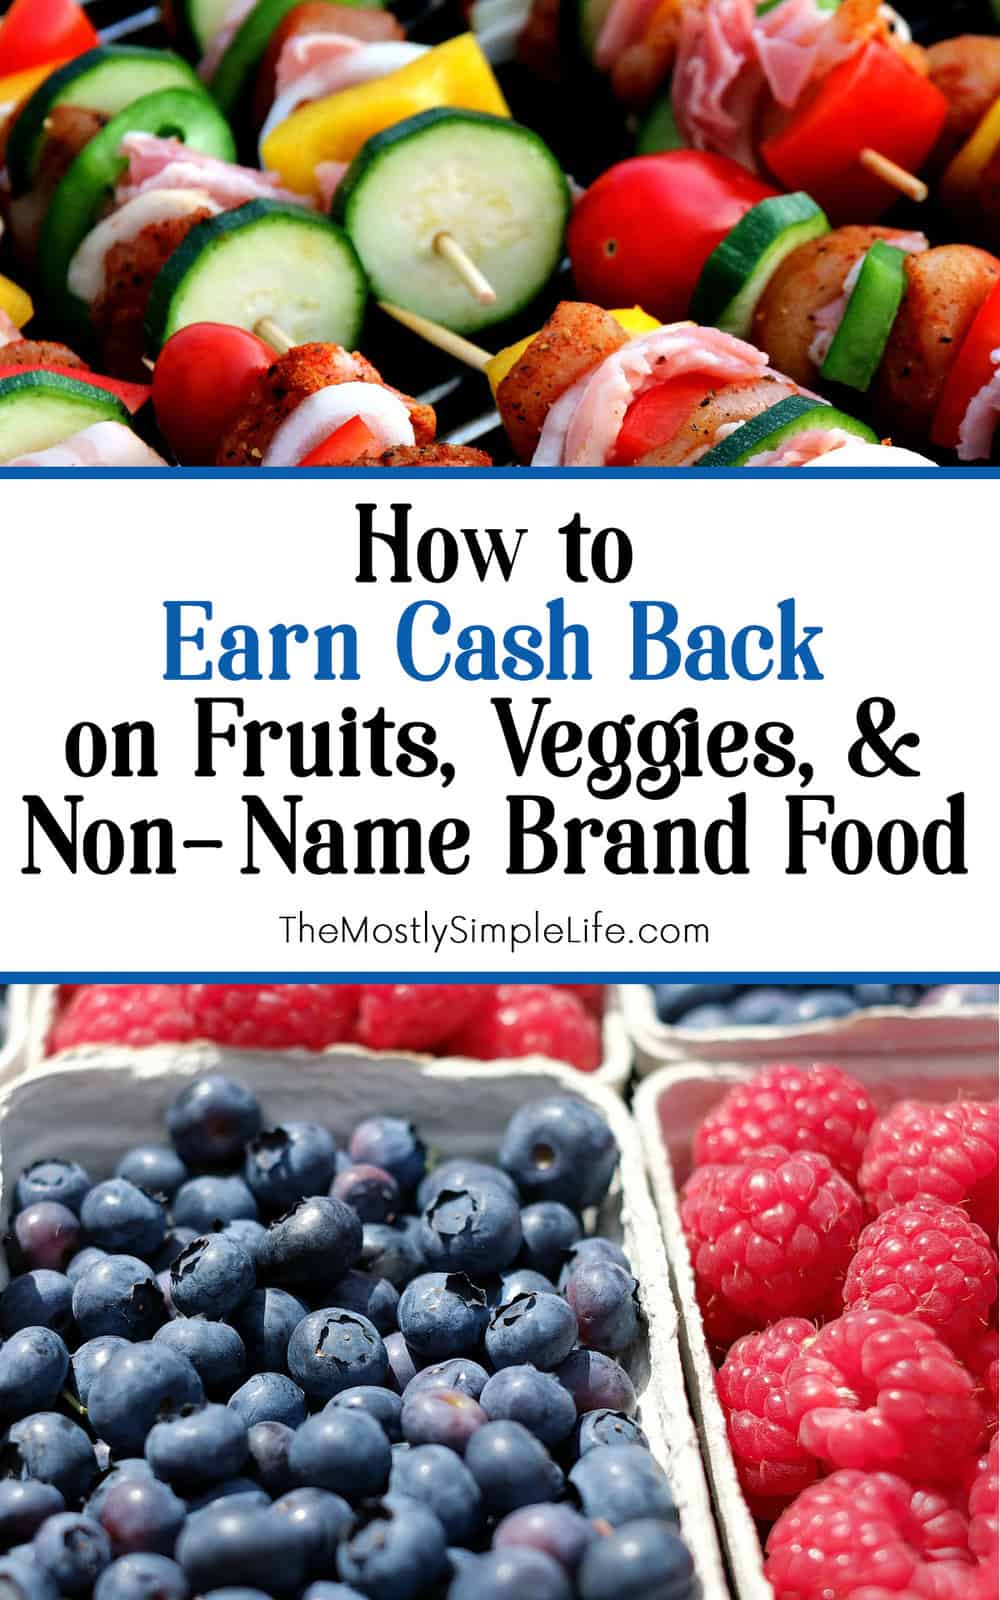 You can earn cash back on fruits, veggies, and non-name brand foods! No coupon clipping. It's super easy. Save money on the healthy stuff! Awesome tutorial shows exactly how to do it! 